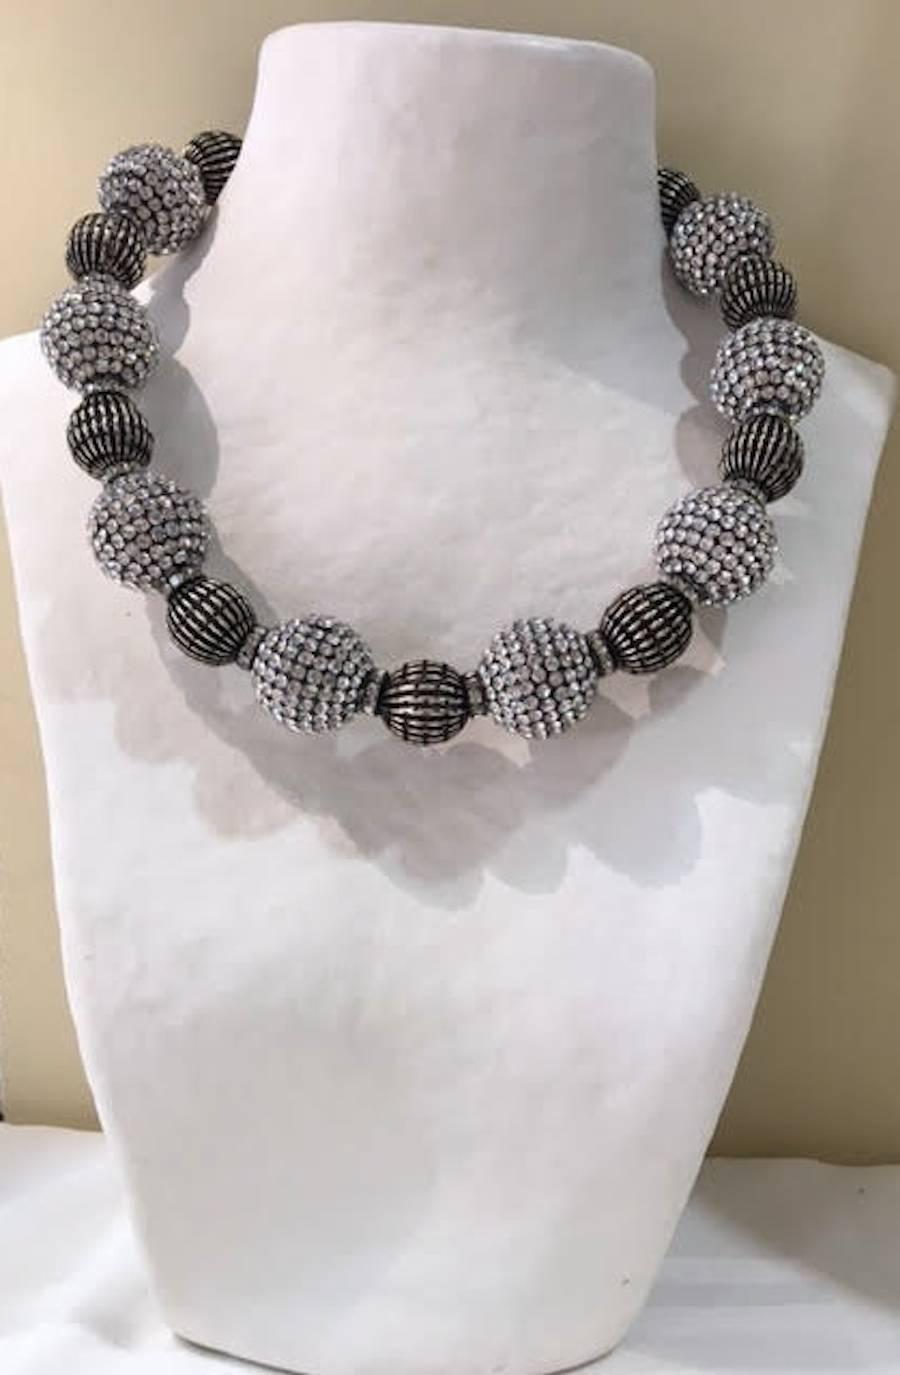 Francoise Montague Bellagio antique silver bead and clear Swarovski Crystal bead choker necklace. Hand made in Paris. 